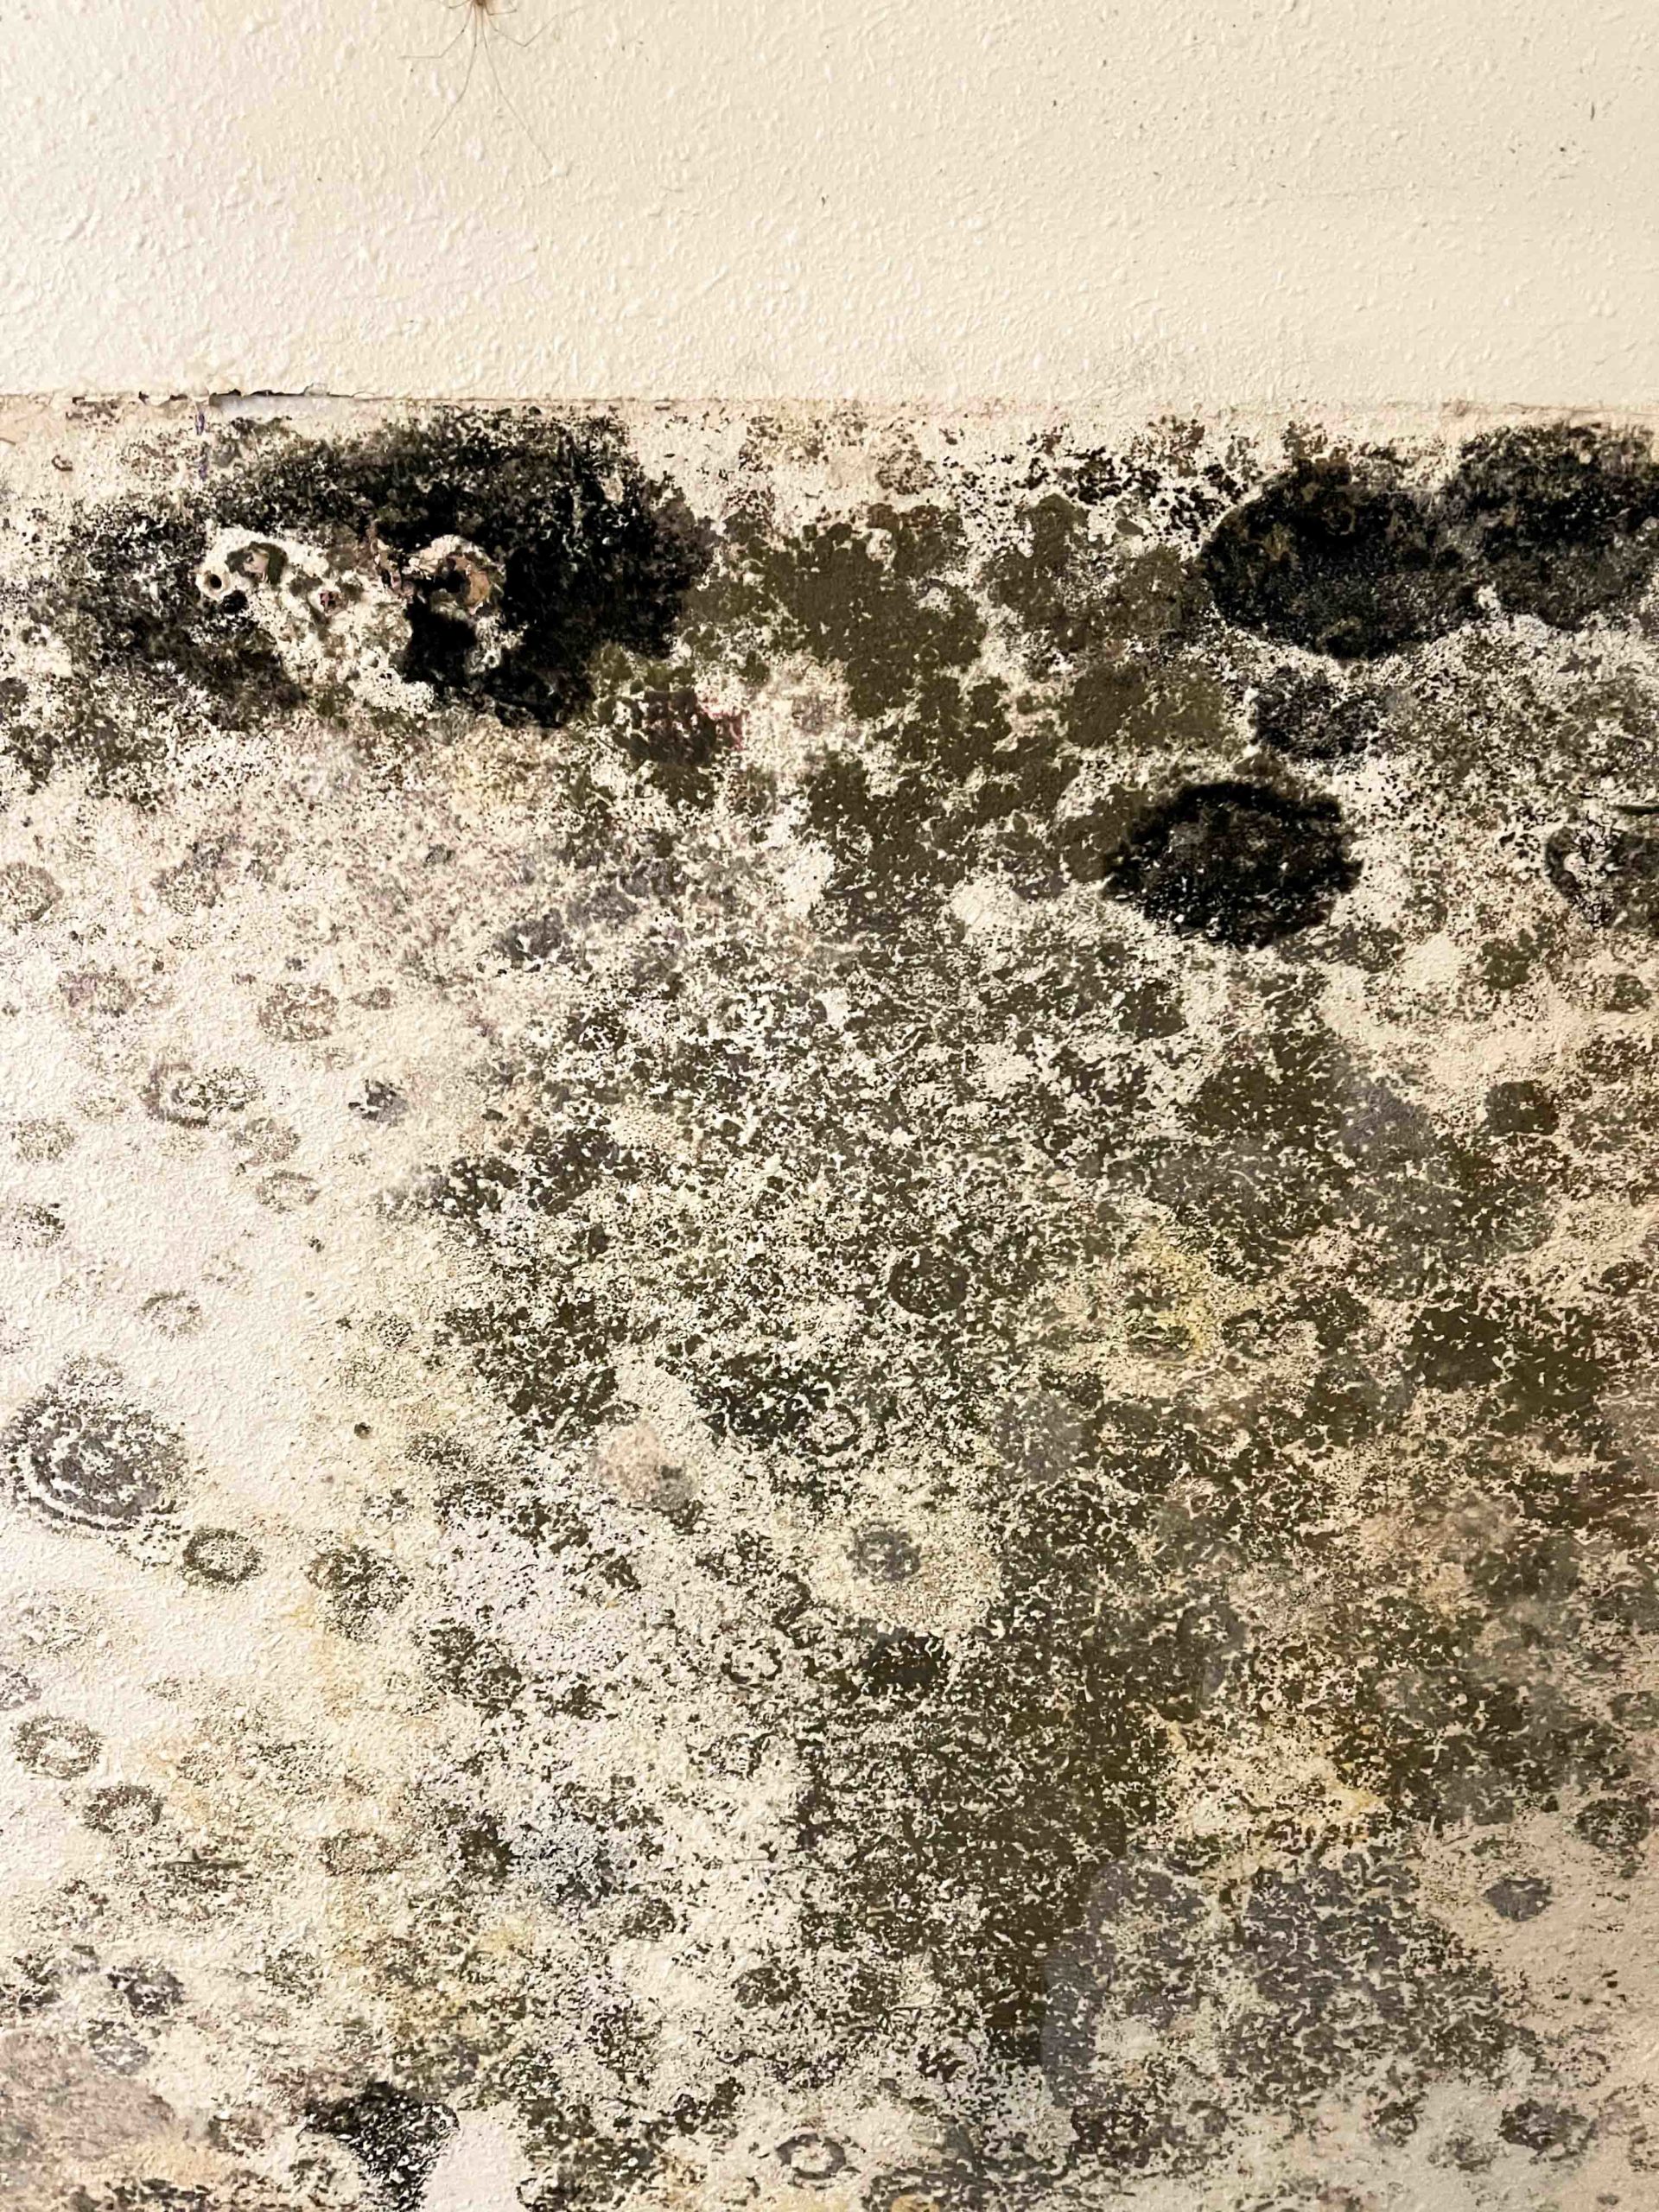 Up Close Mold On Drywall Behind Cabinet